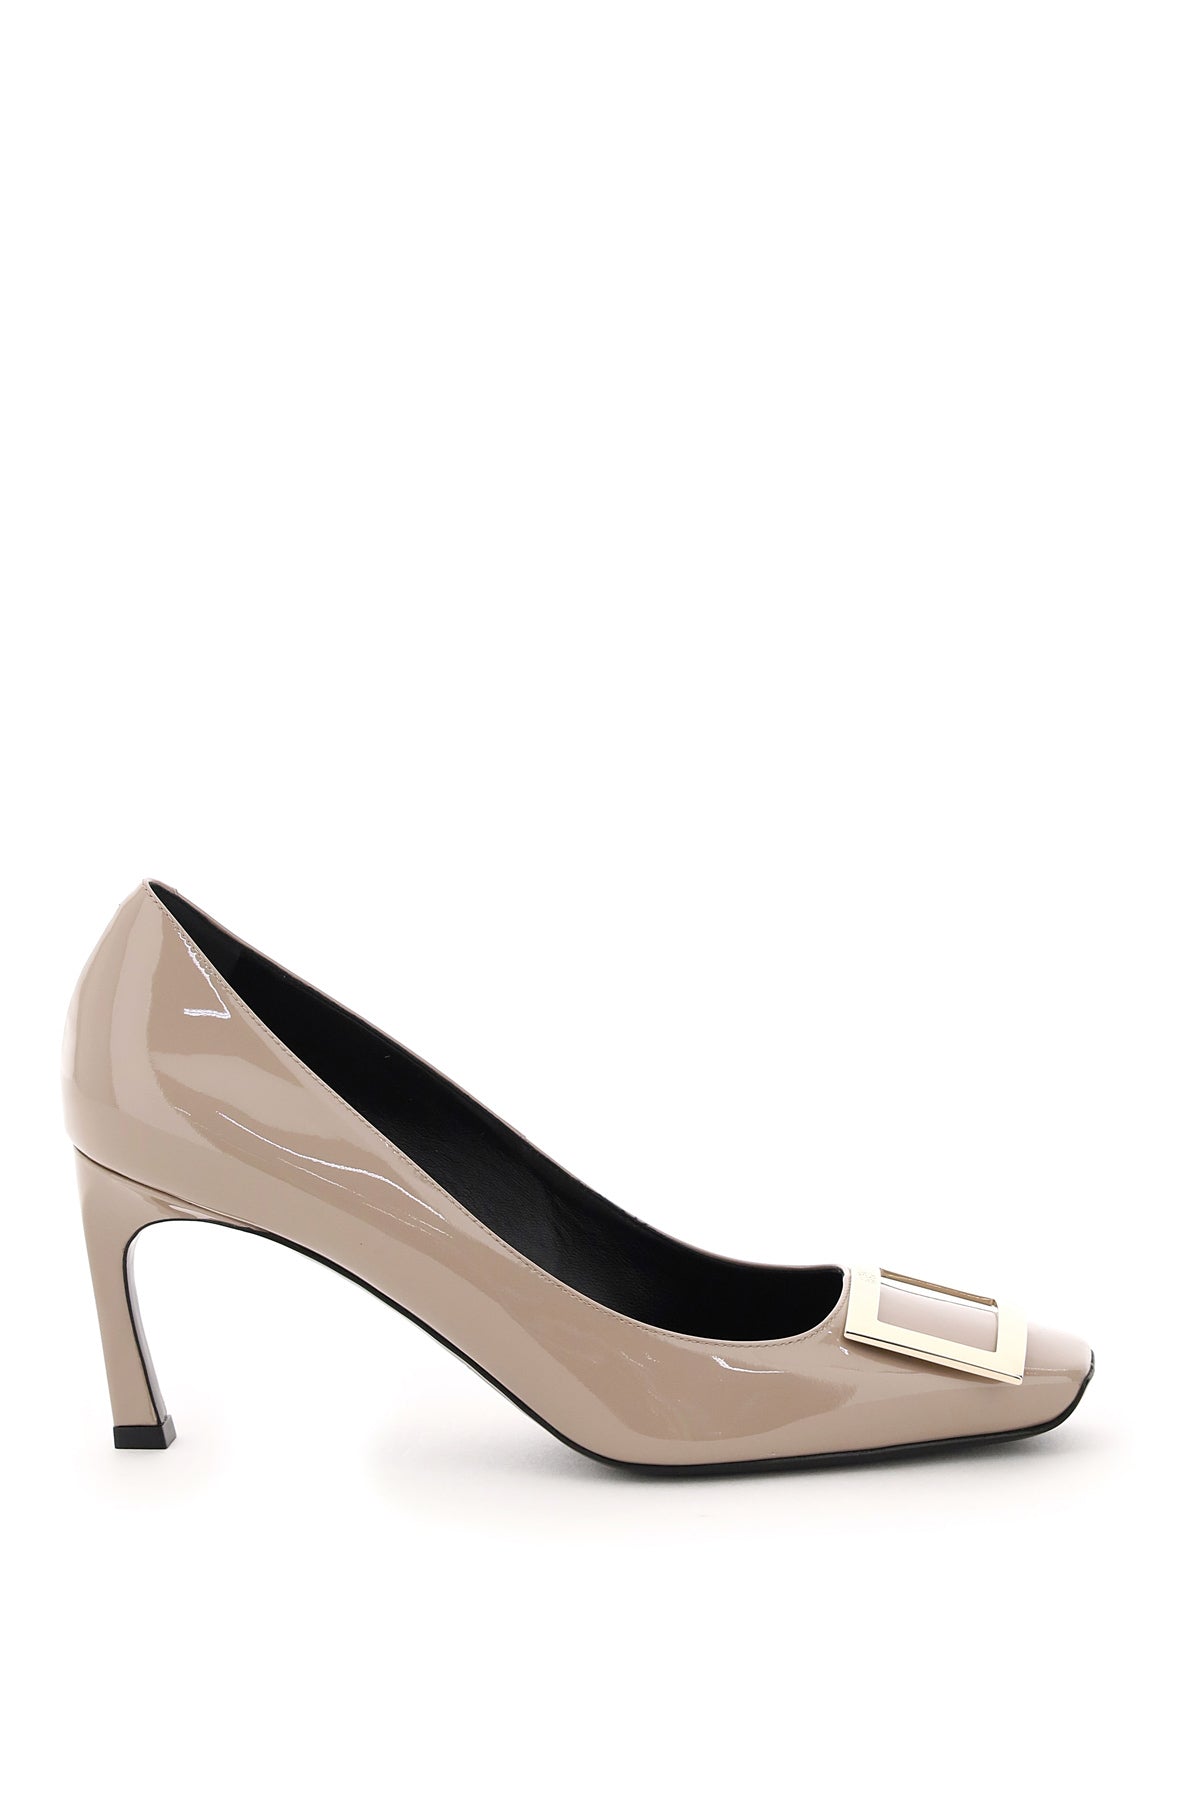 Beige Belle Vivier Trompette ビビエ ル ベルベﾞットロンペットパンプス with メタルスクエアバックル for Women